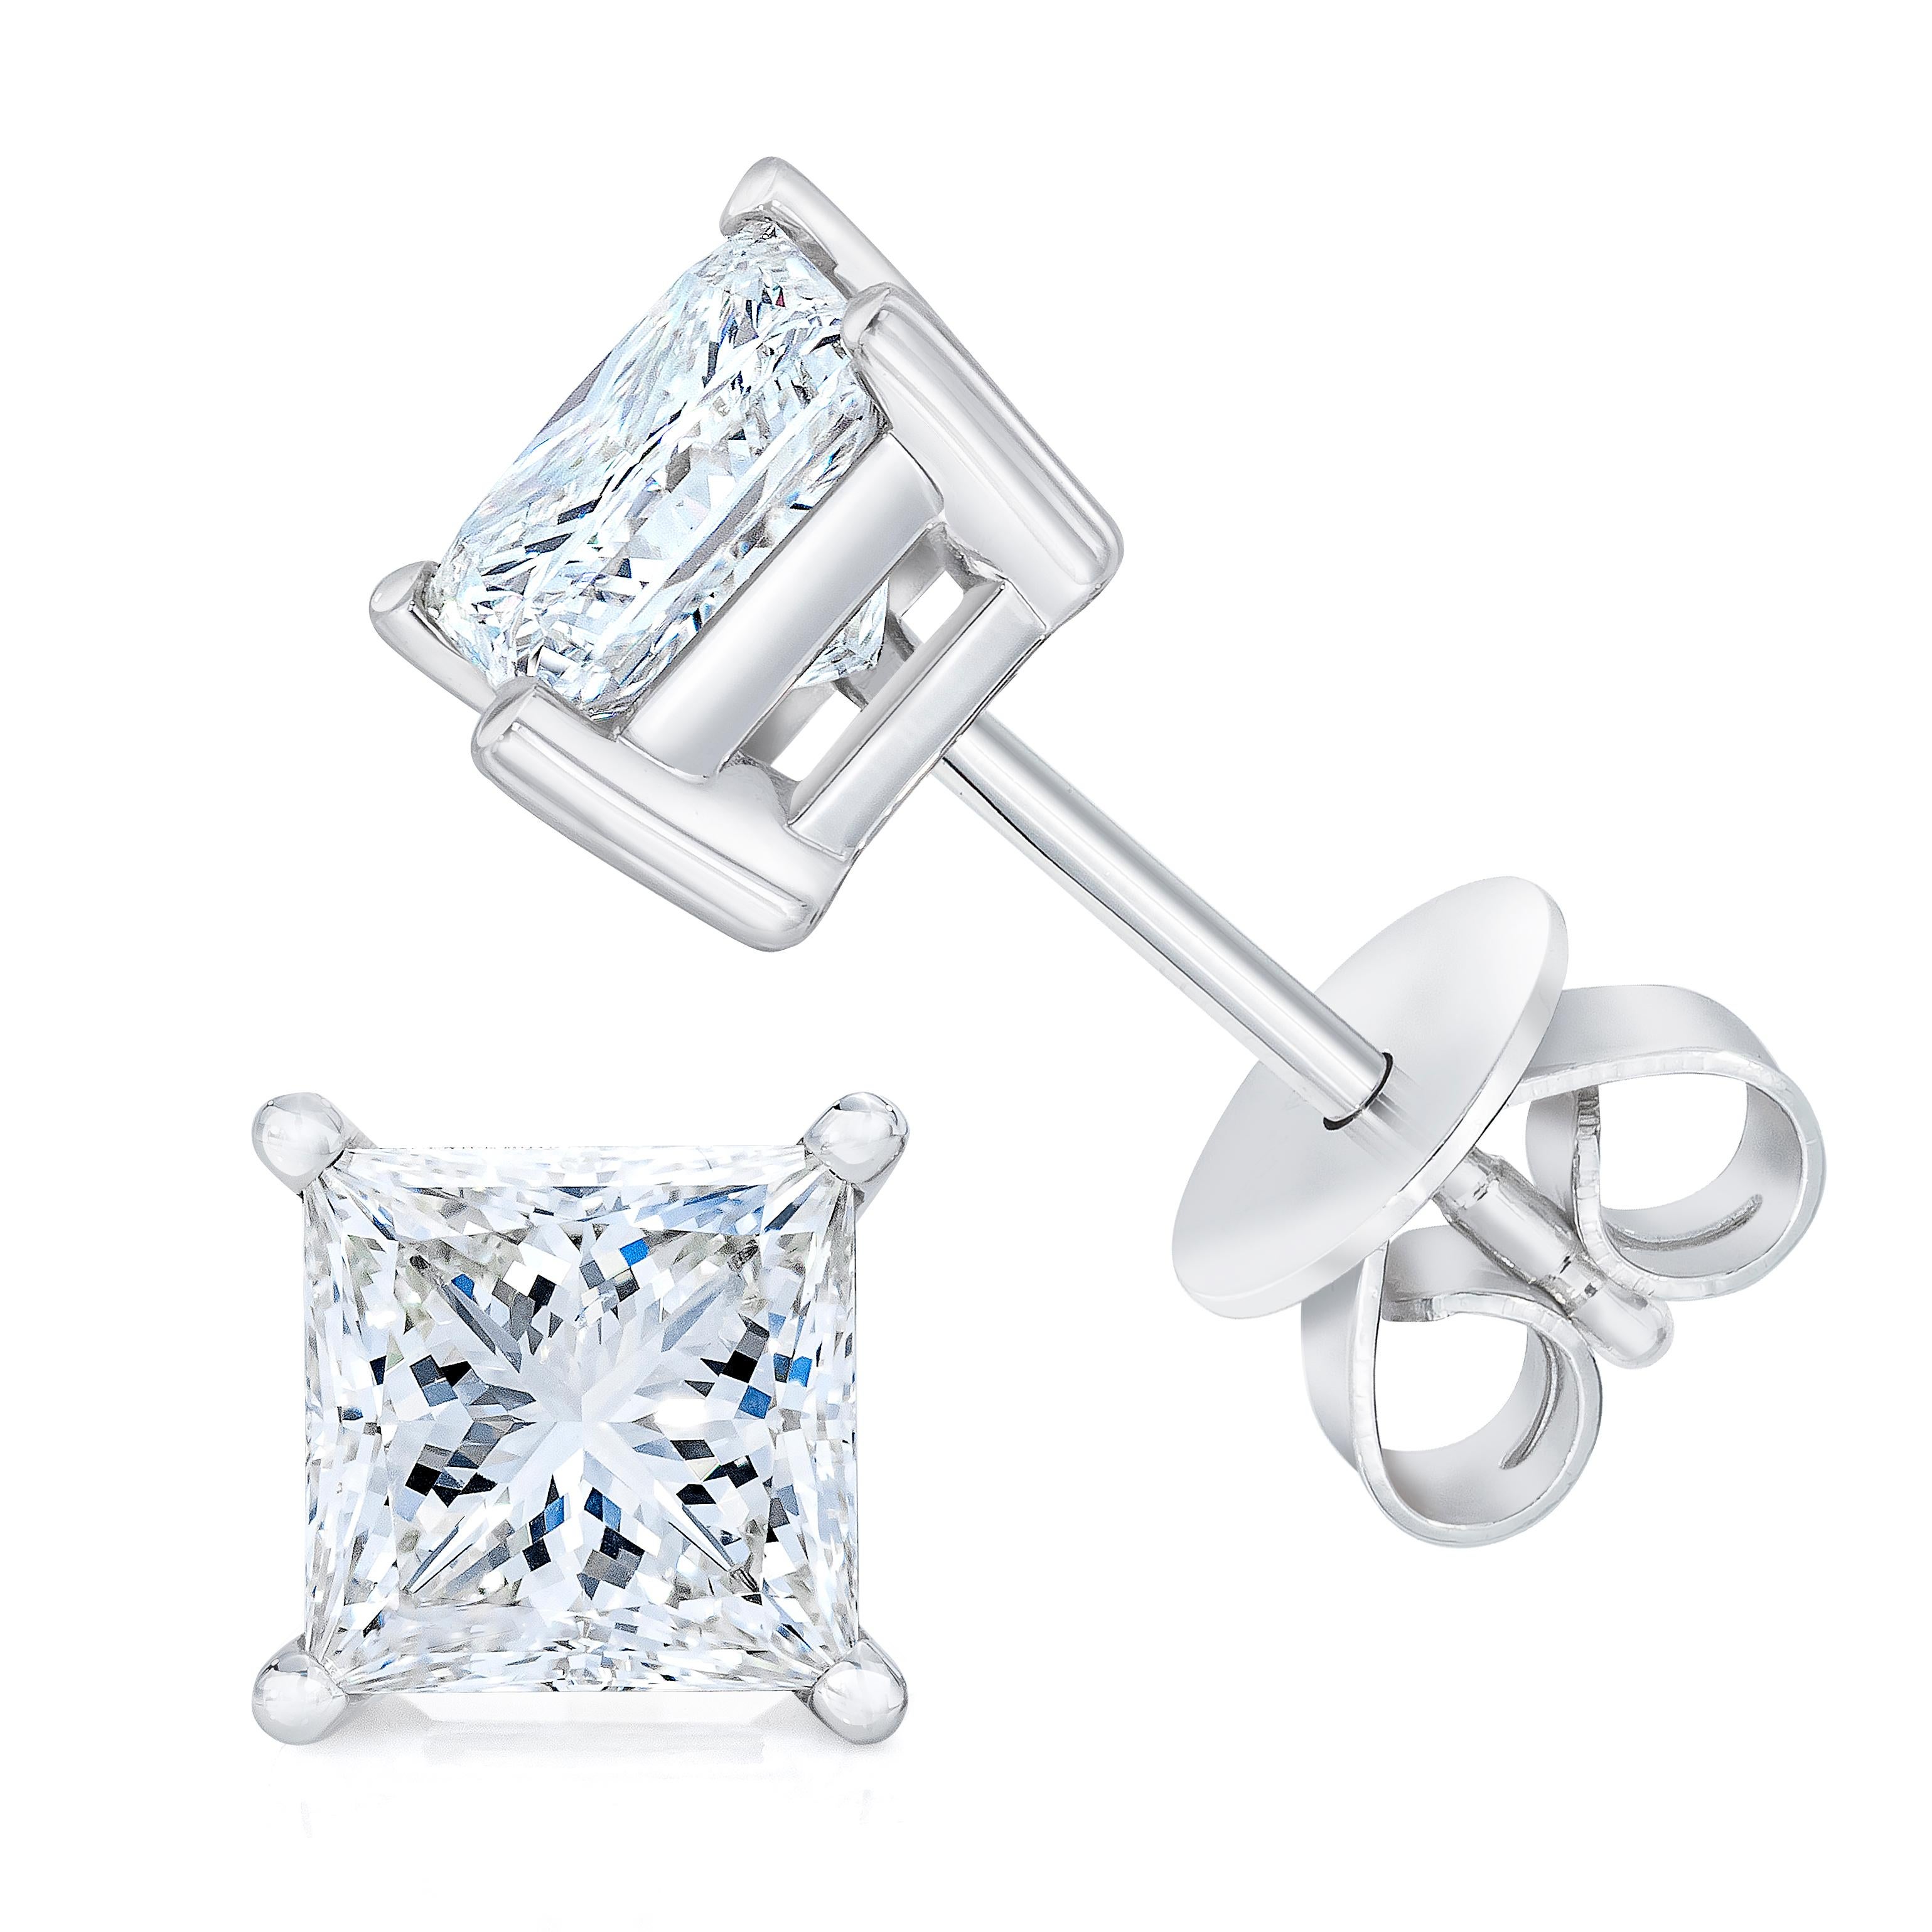 Celebrate any occasion with these classic shimmering diamond stud earrings. Crafted from 14k White Gold each earring showcases a sparkling Princess-Cut Solitaire Diamond in a 4-Prong Setting. Dazzling with 1/4 cttw of diamonds and a bright polished